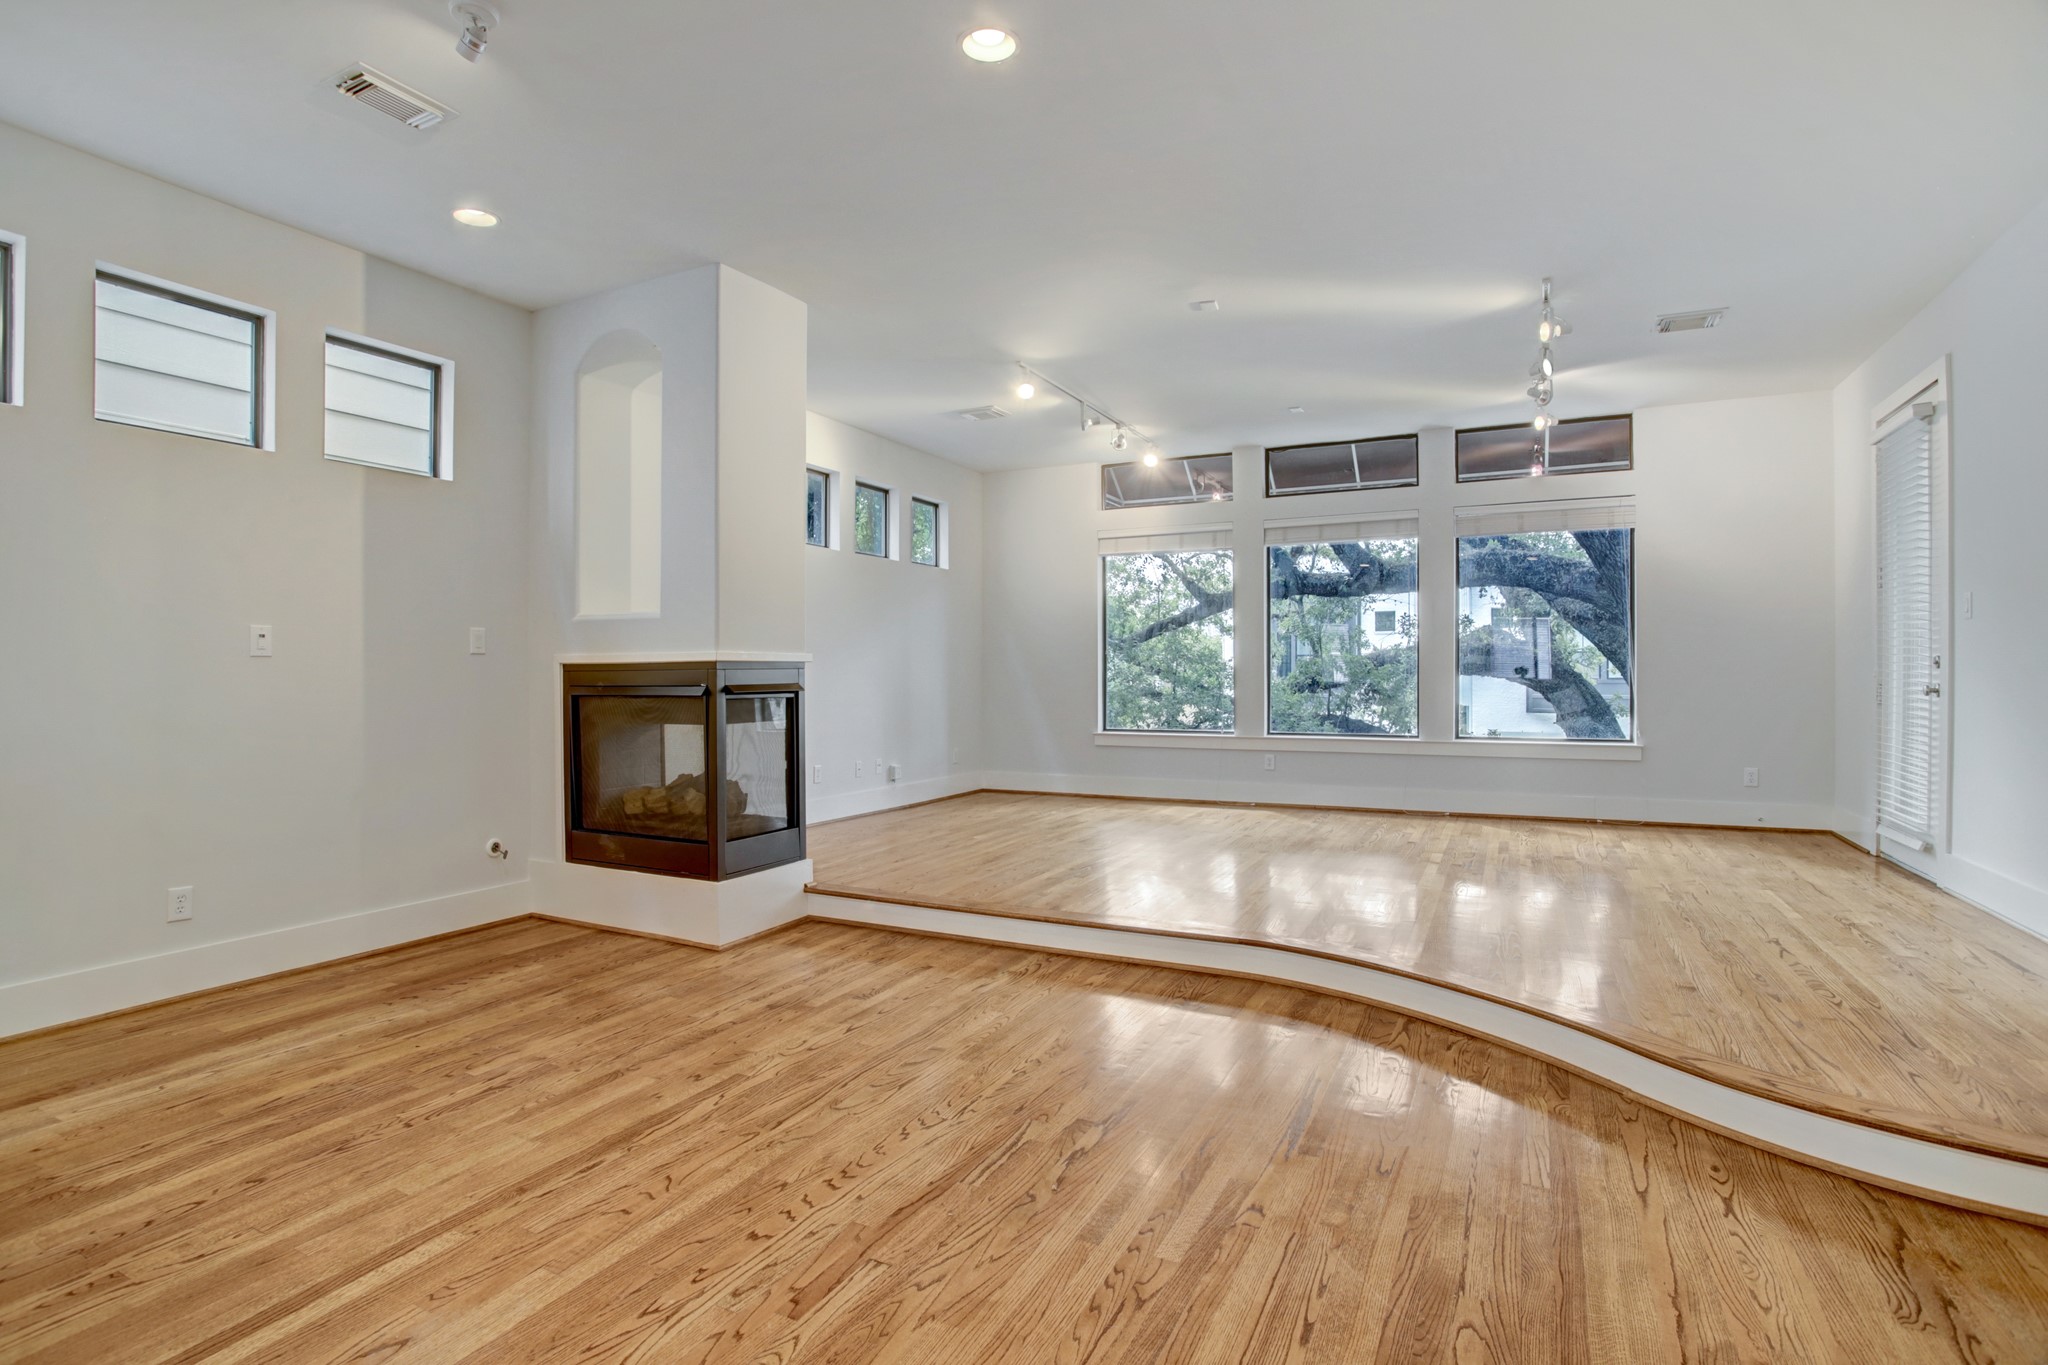 Dining Room and Living area - a wall of windows lights up the room. The beautiful hardwood floors glow with the natural light.